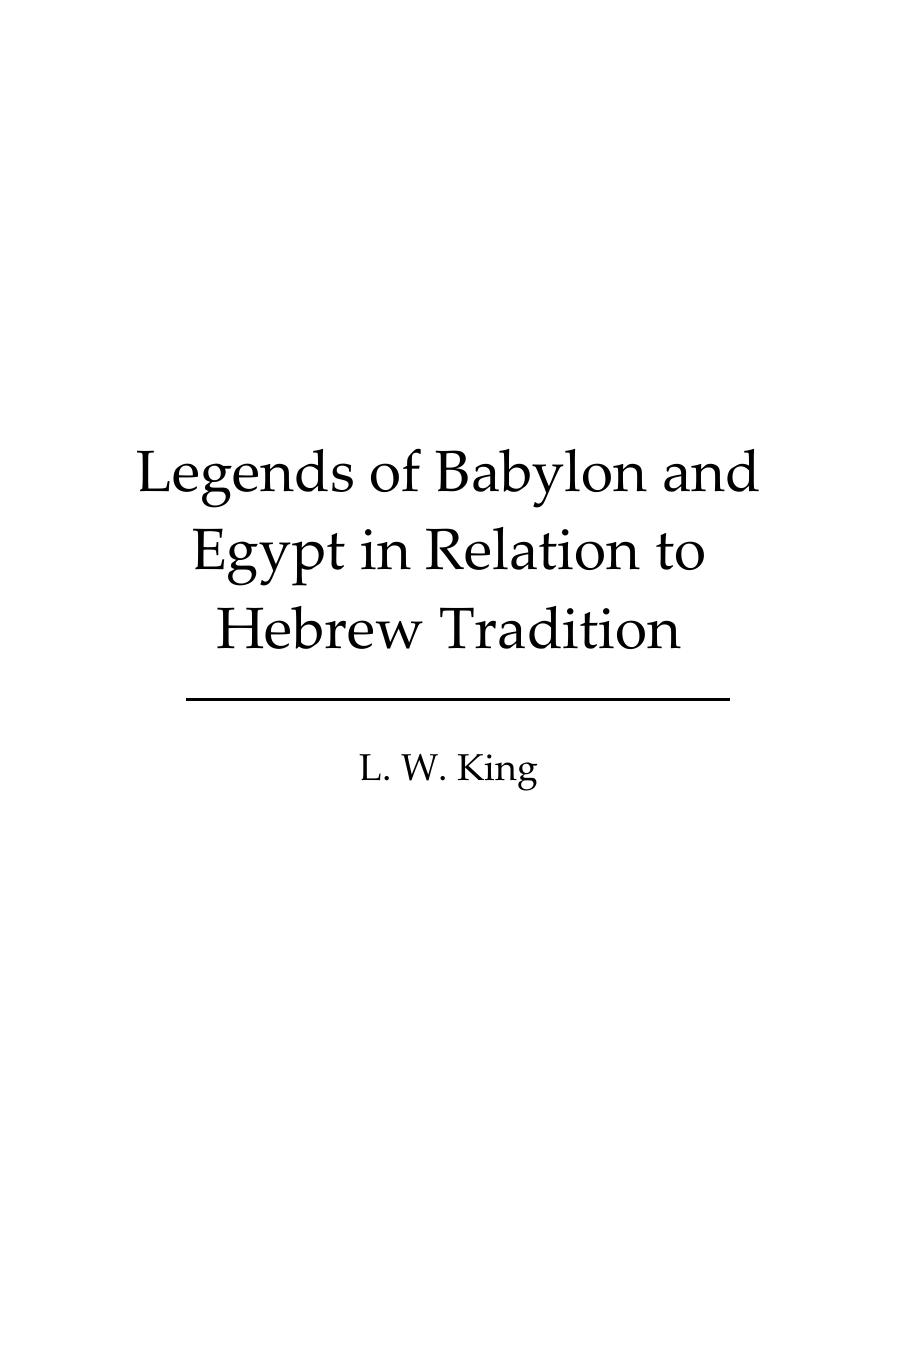 Legends of Babylon and Egypt in Relation to Hebrew Tradition by L. W. King